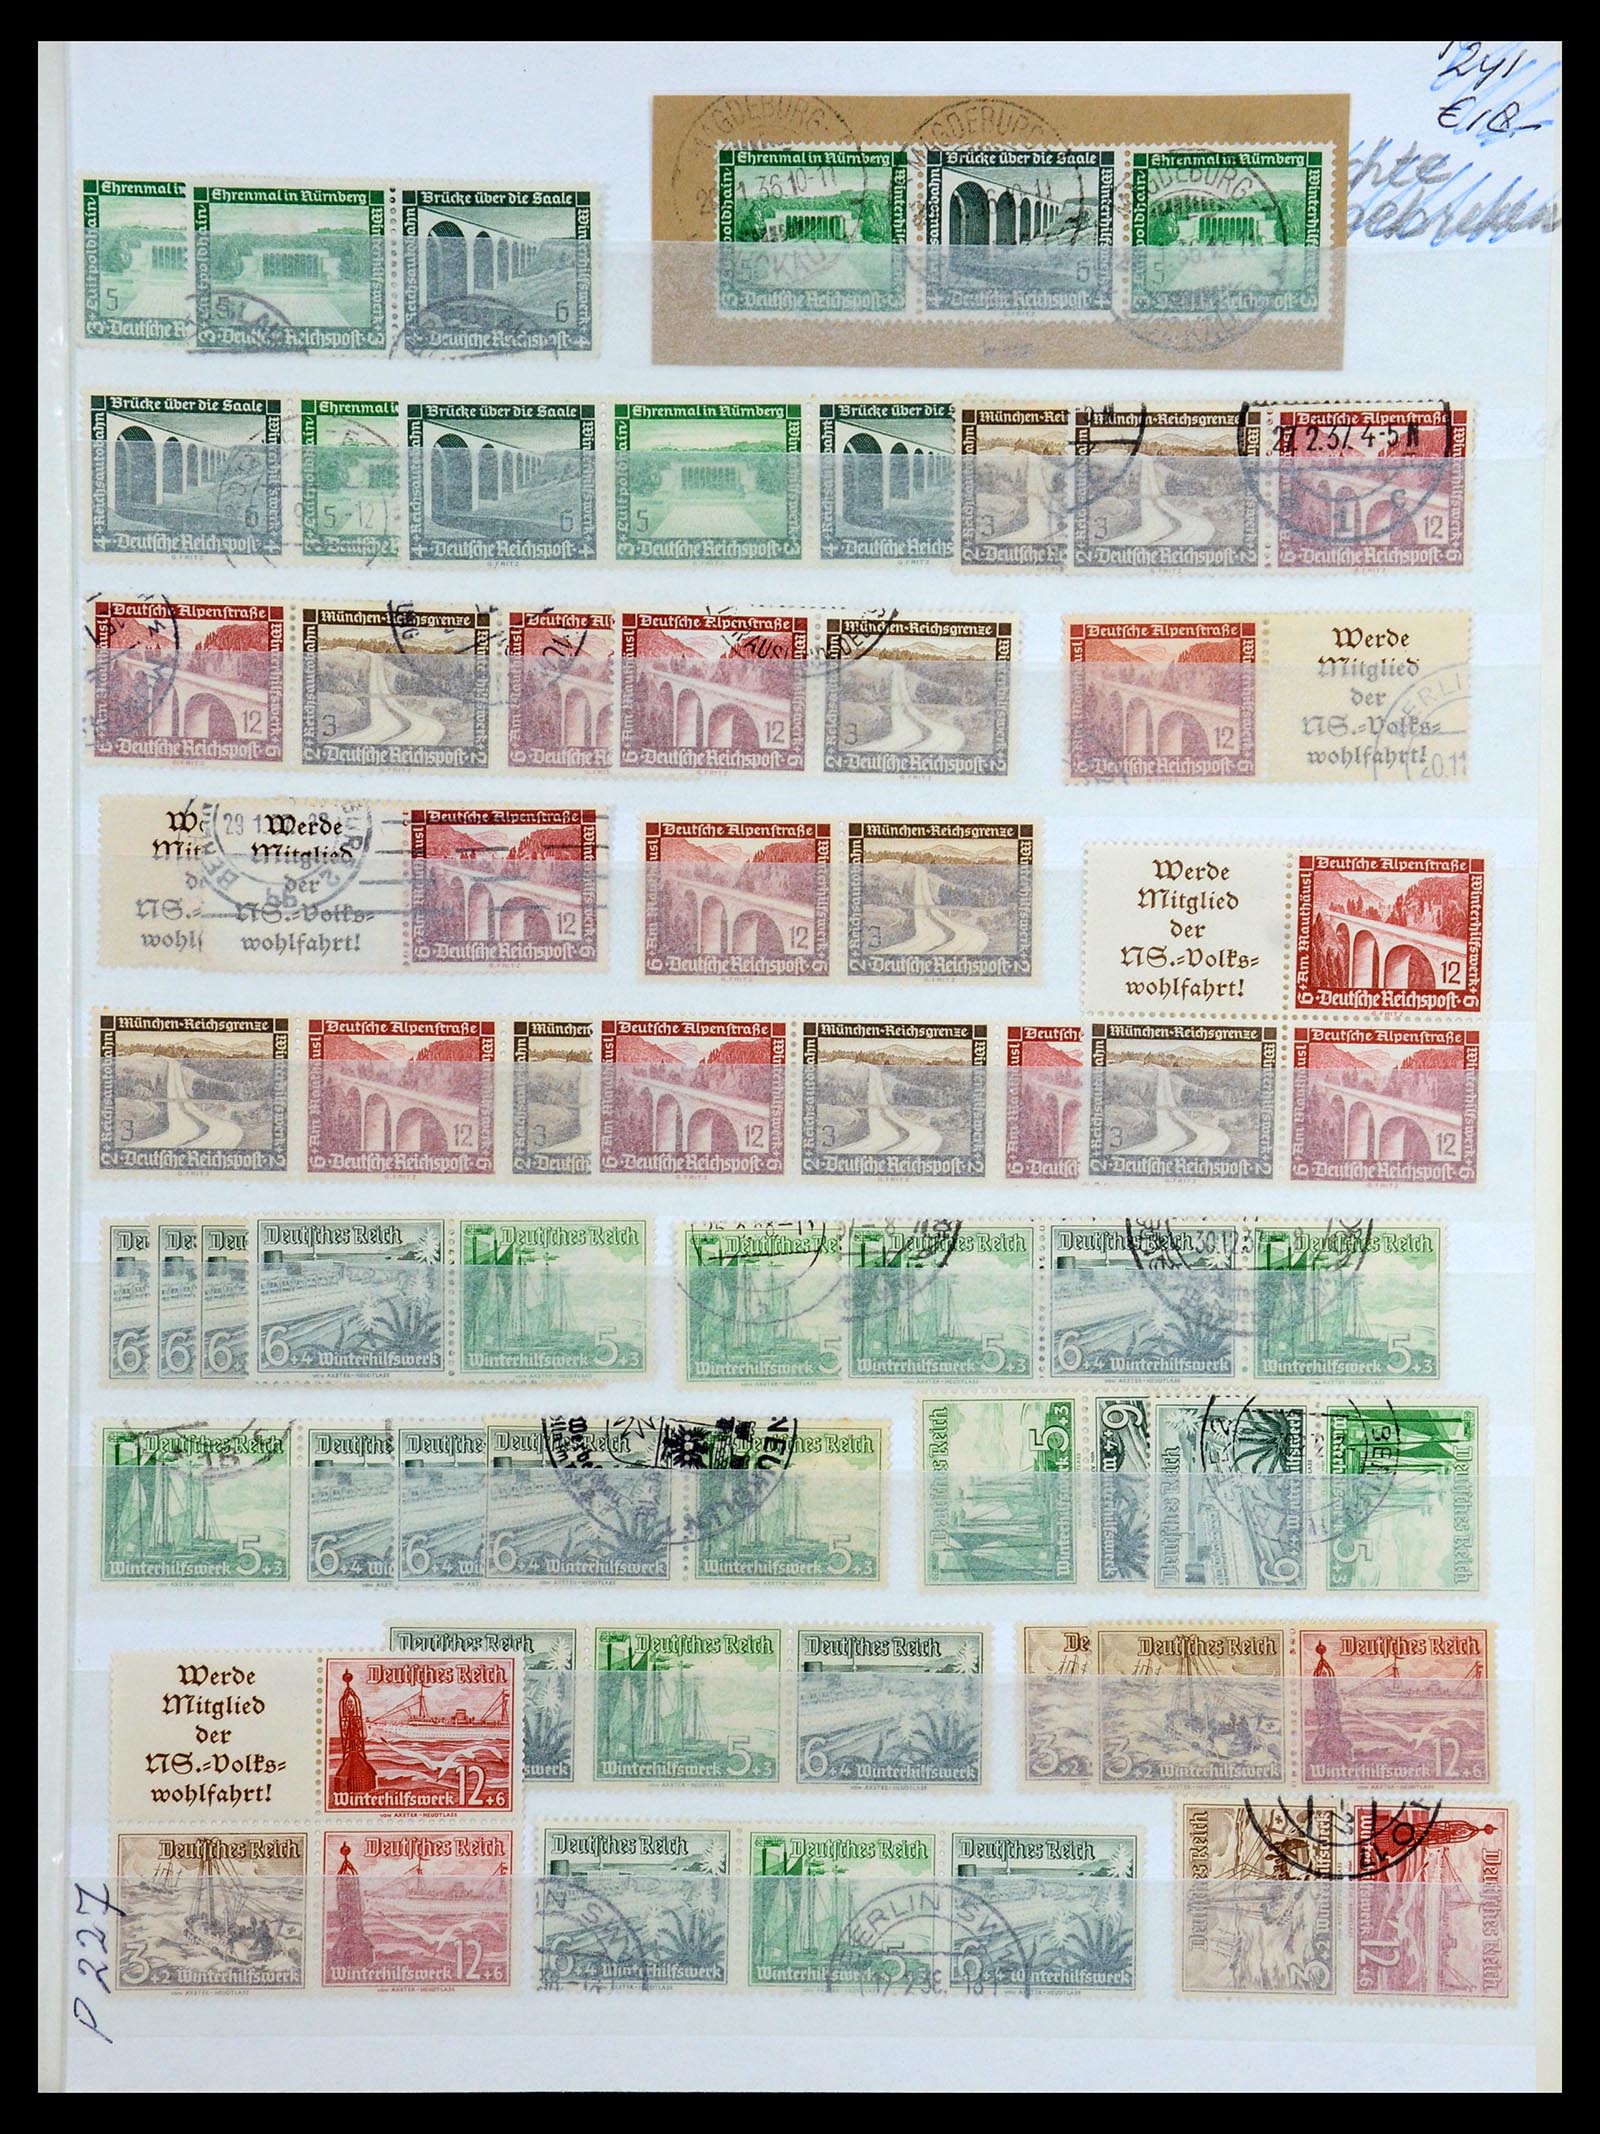 36370 020 - Stamp collection 36370 Germany combinations 1910-1980.